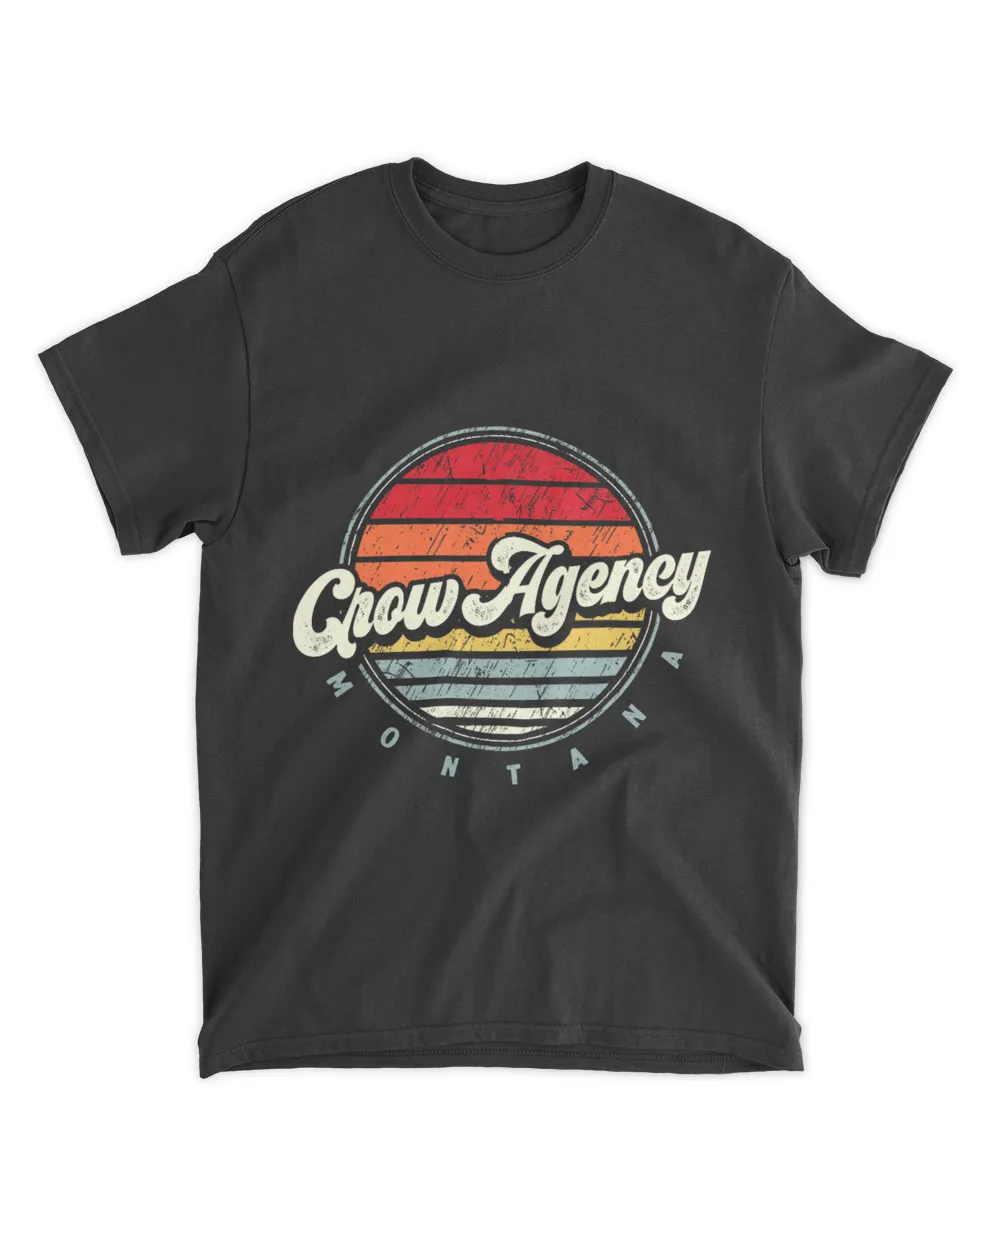 Retro Crow Agency Home State Cool 70s Style Sunset